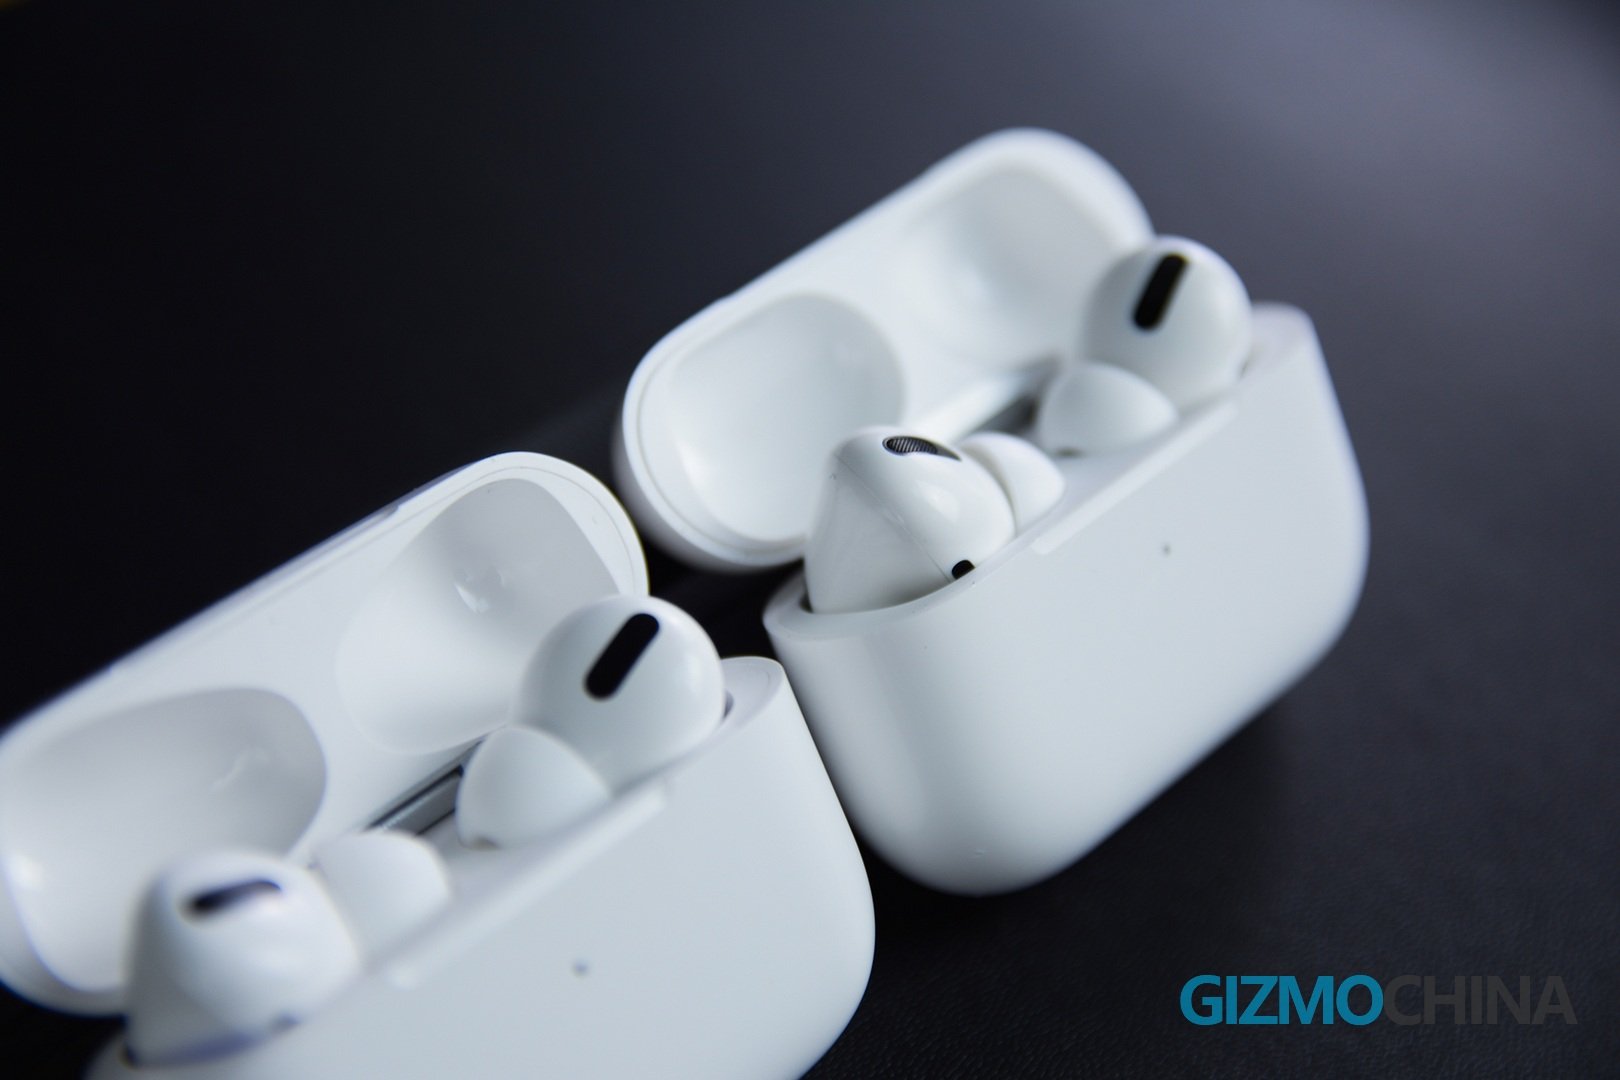 Fake AirPods Pro Hands-On Review: $59 KnockOff gets very close to the real deal - Gizmochina